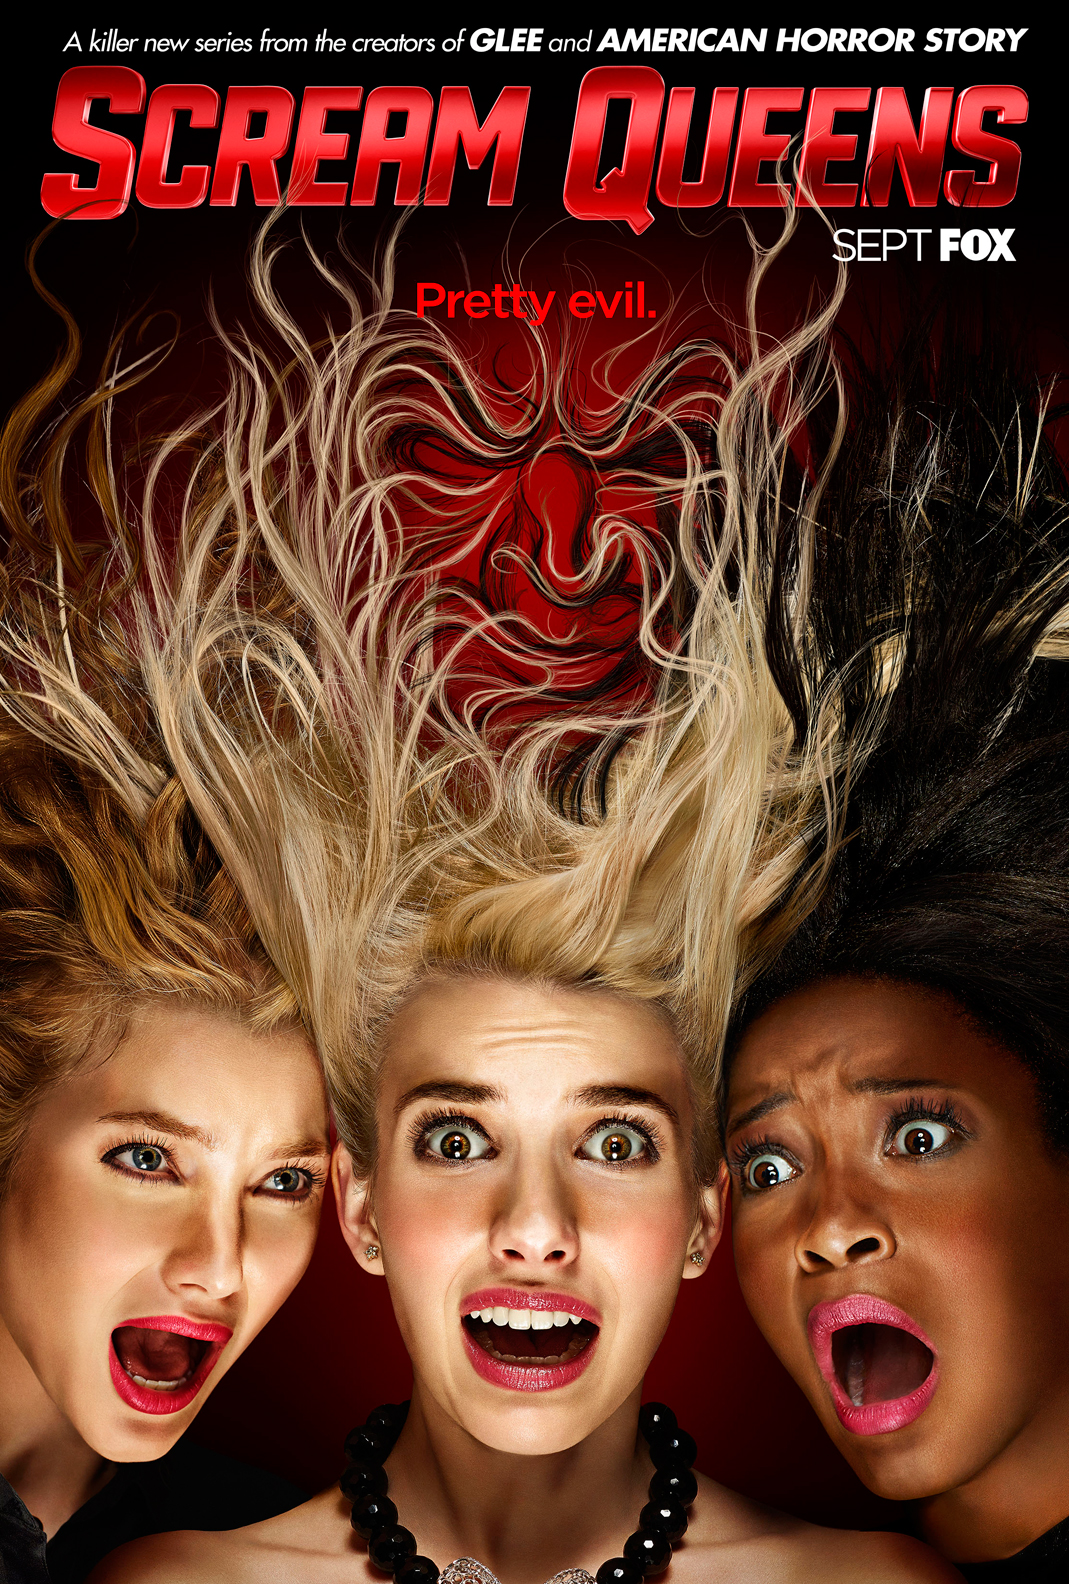 Wight Blood: Scream Queens Season Two - Episodes 5 & 6 recap and review